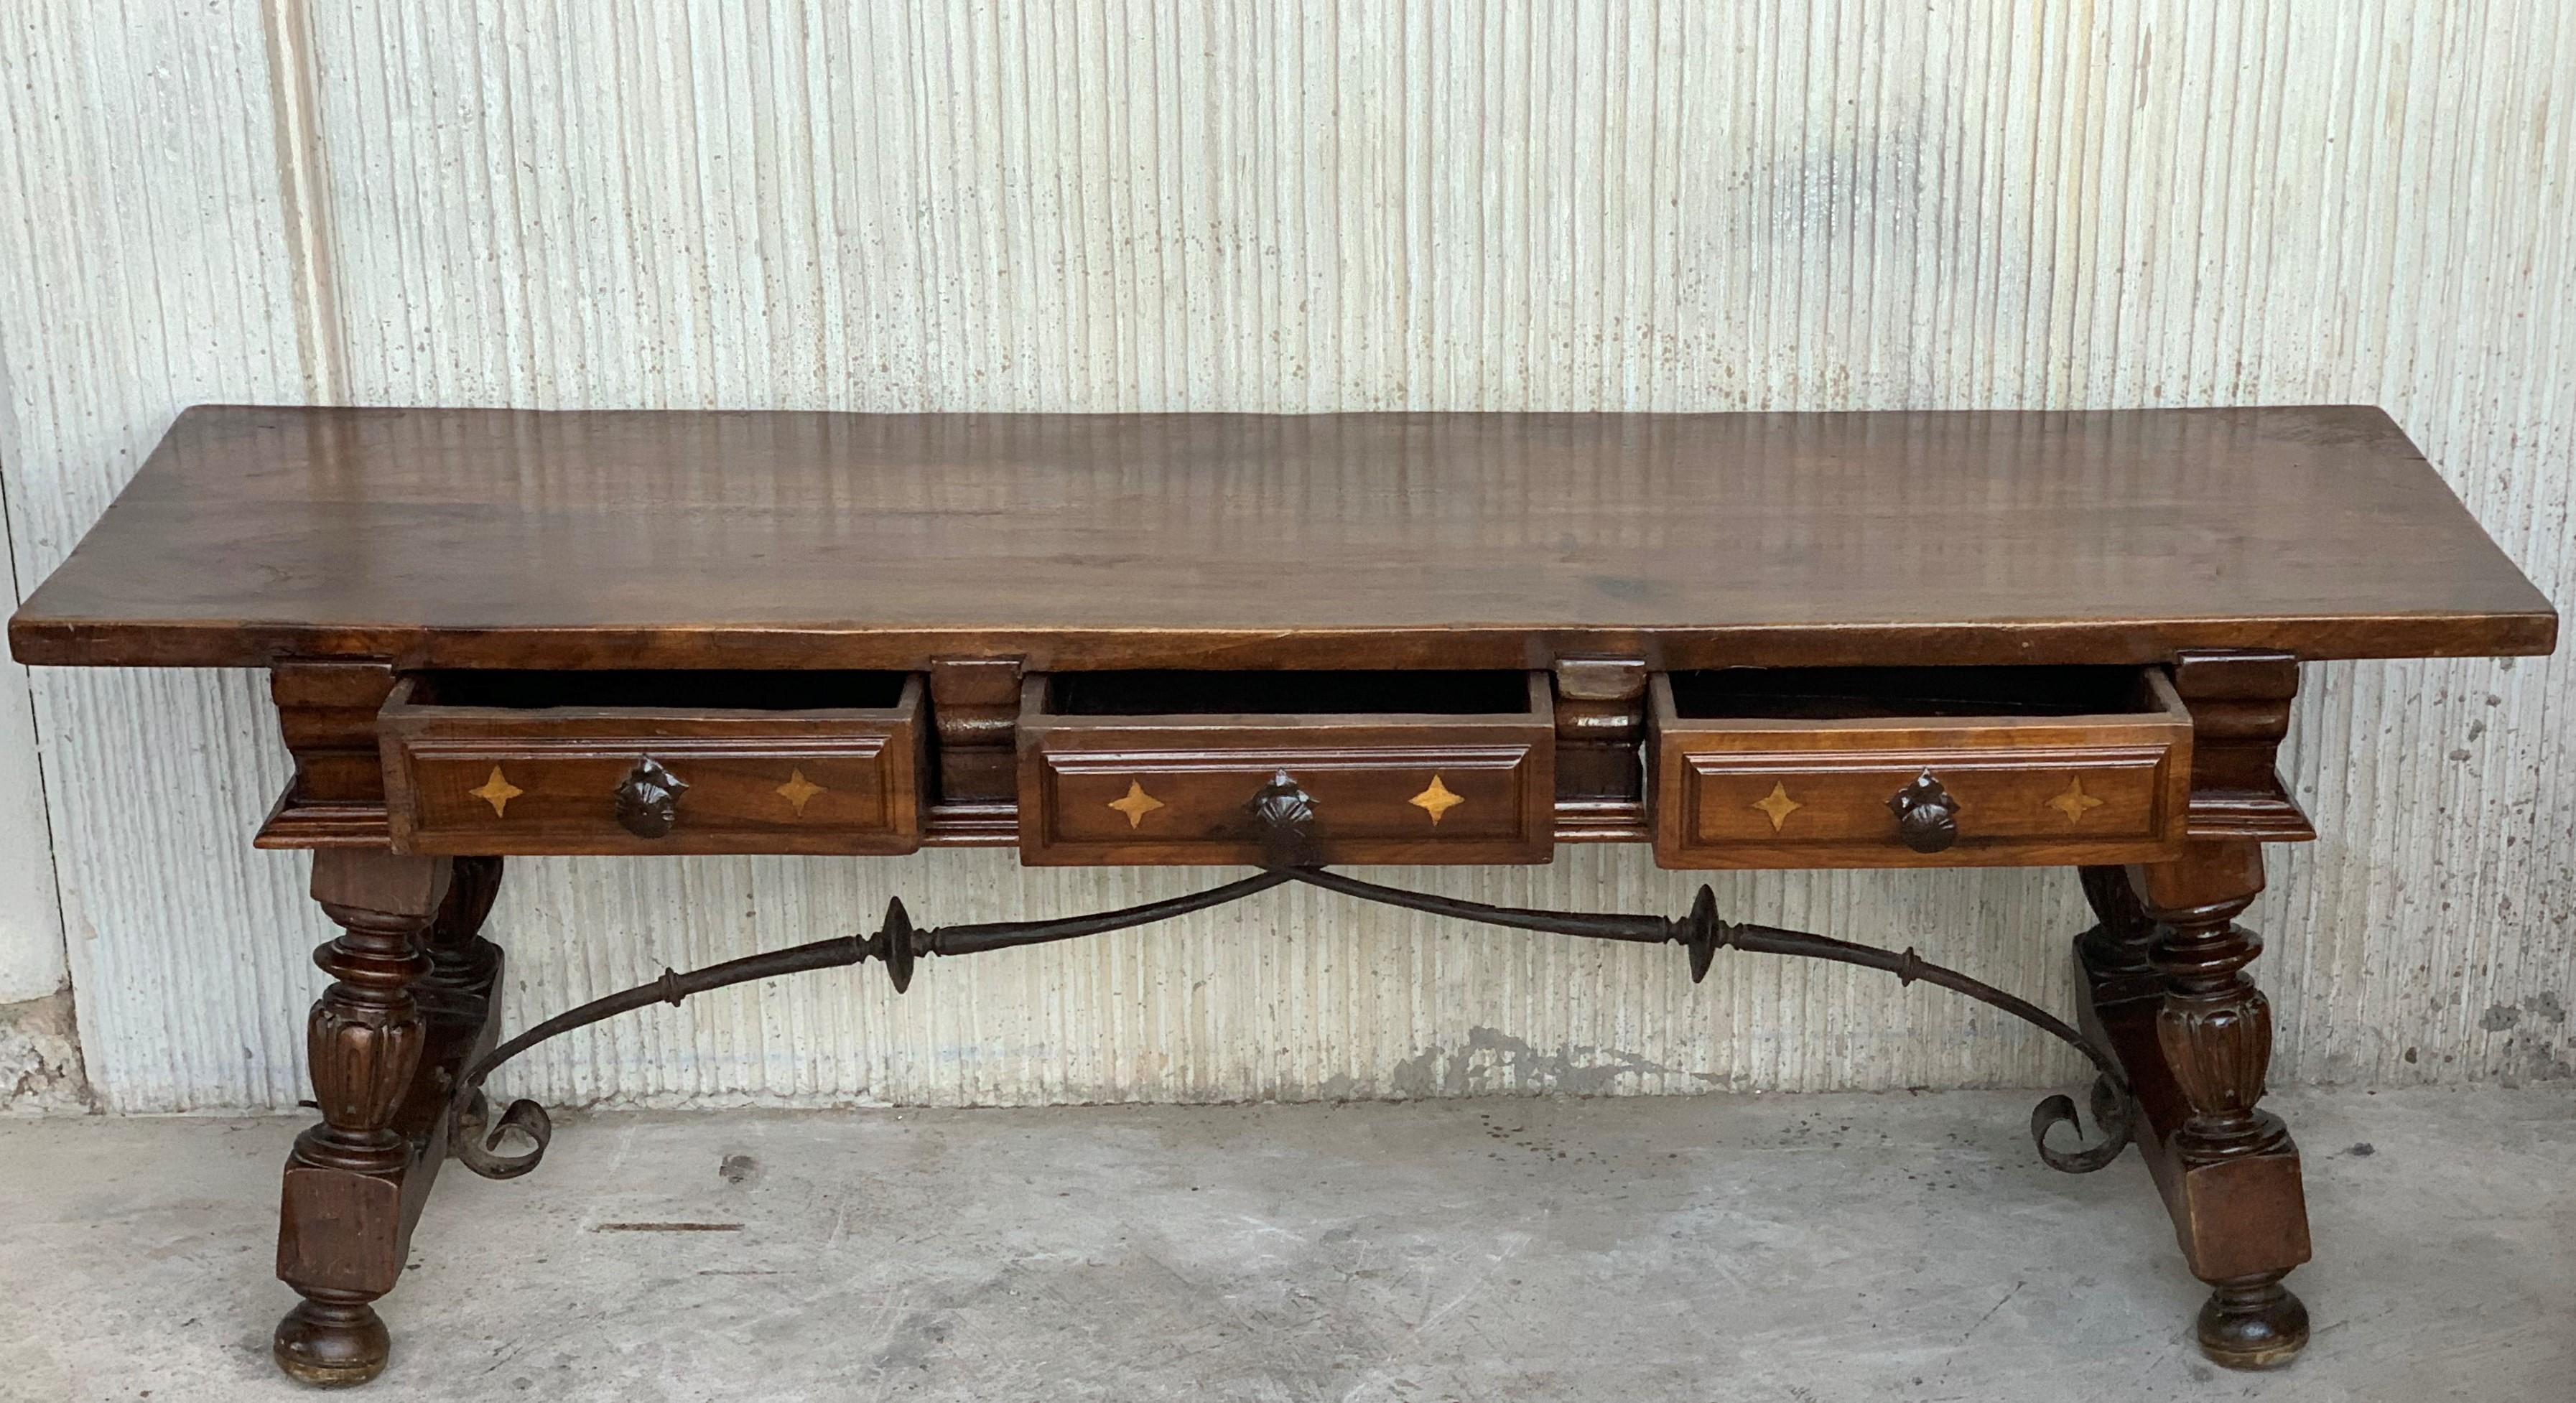 Baroque 18th Spanish Bench or Low Console Table with Marquetry Drawers & Iron Stretcher